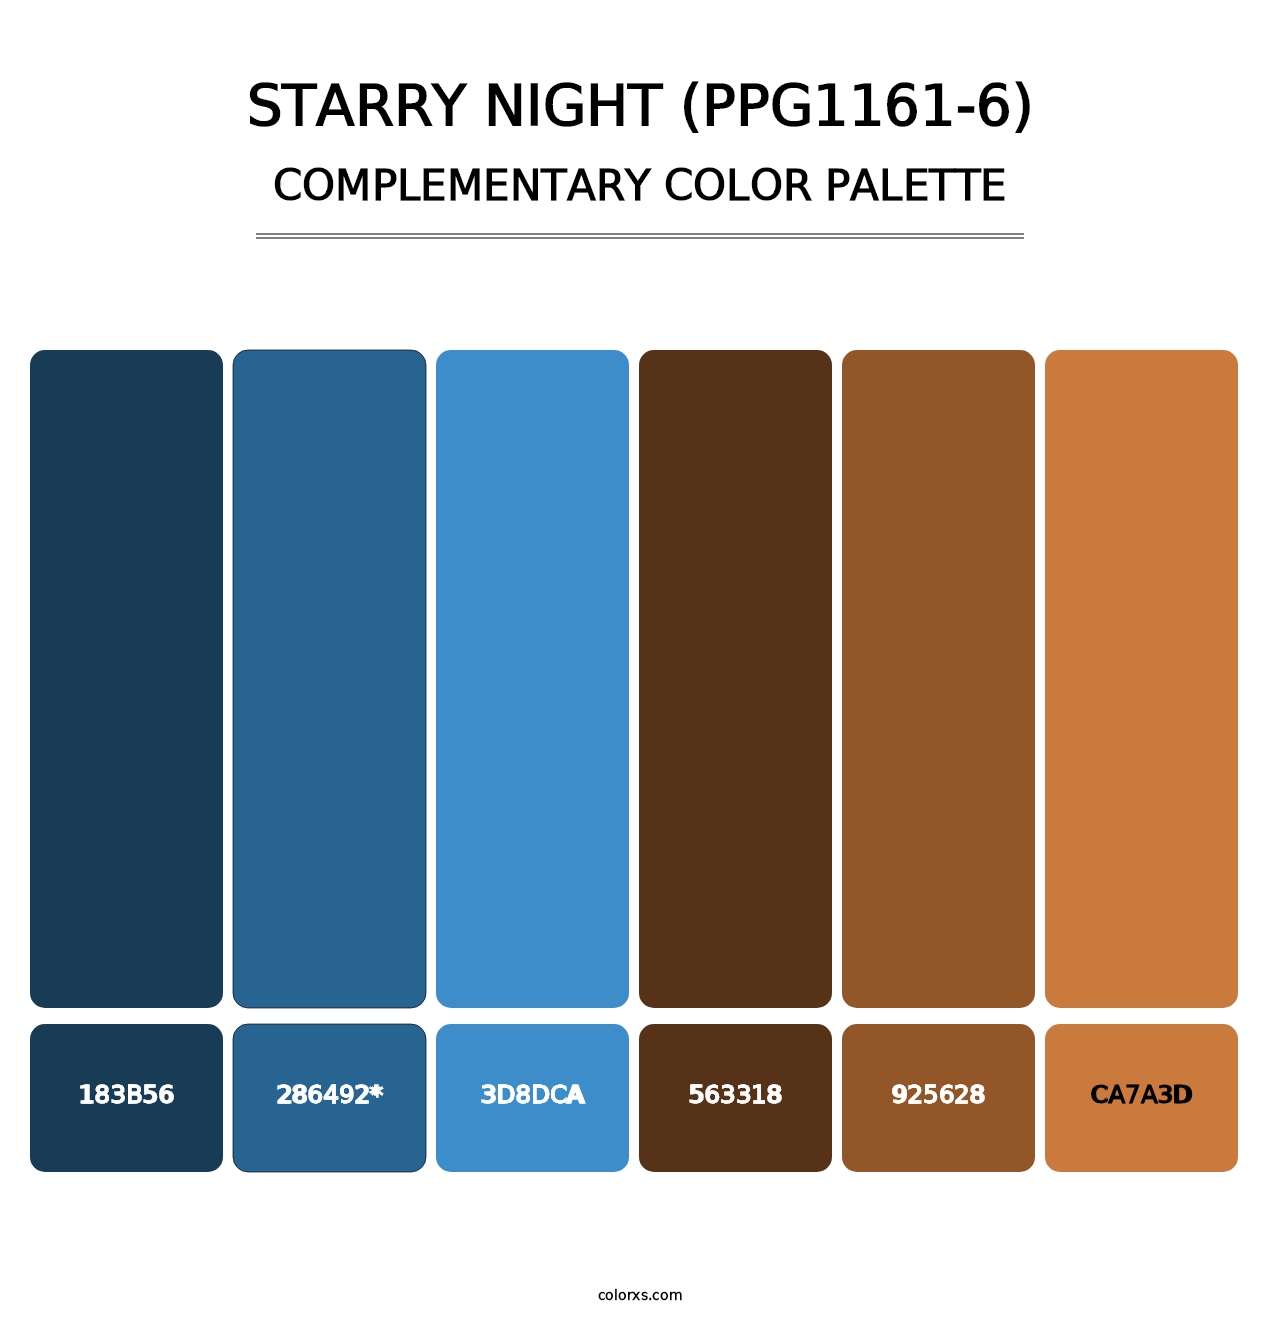 Starry Night (PPG1161-6) - Complementary Color Palette